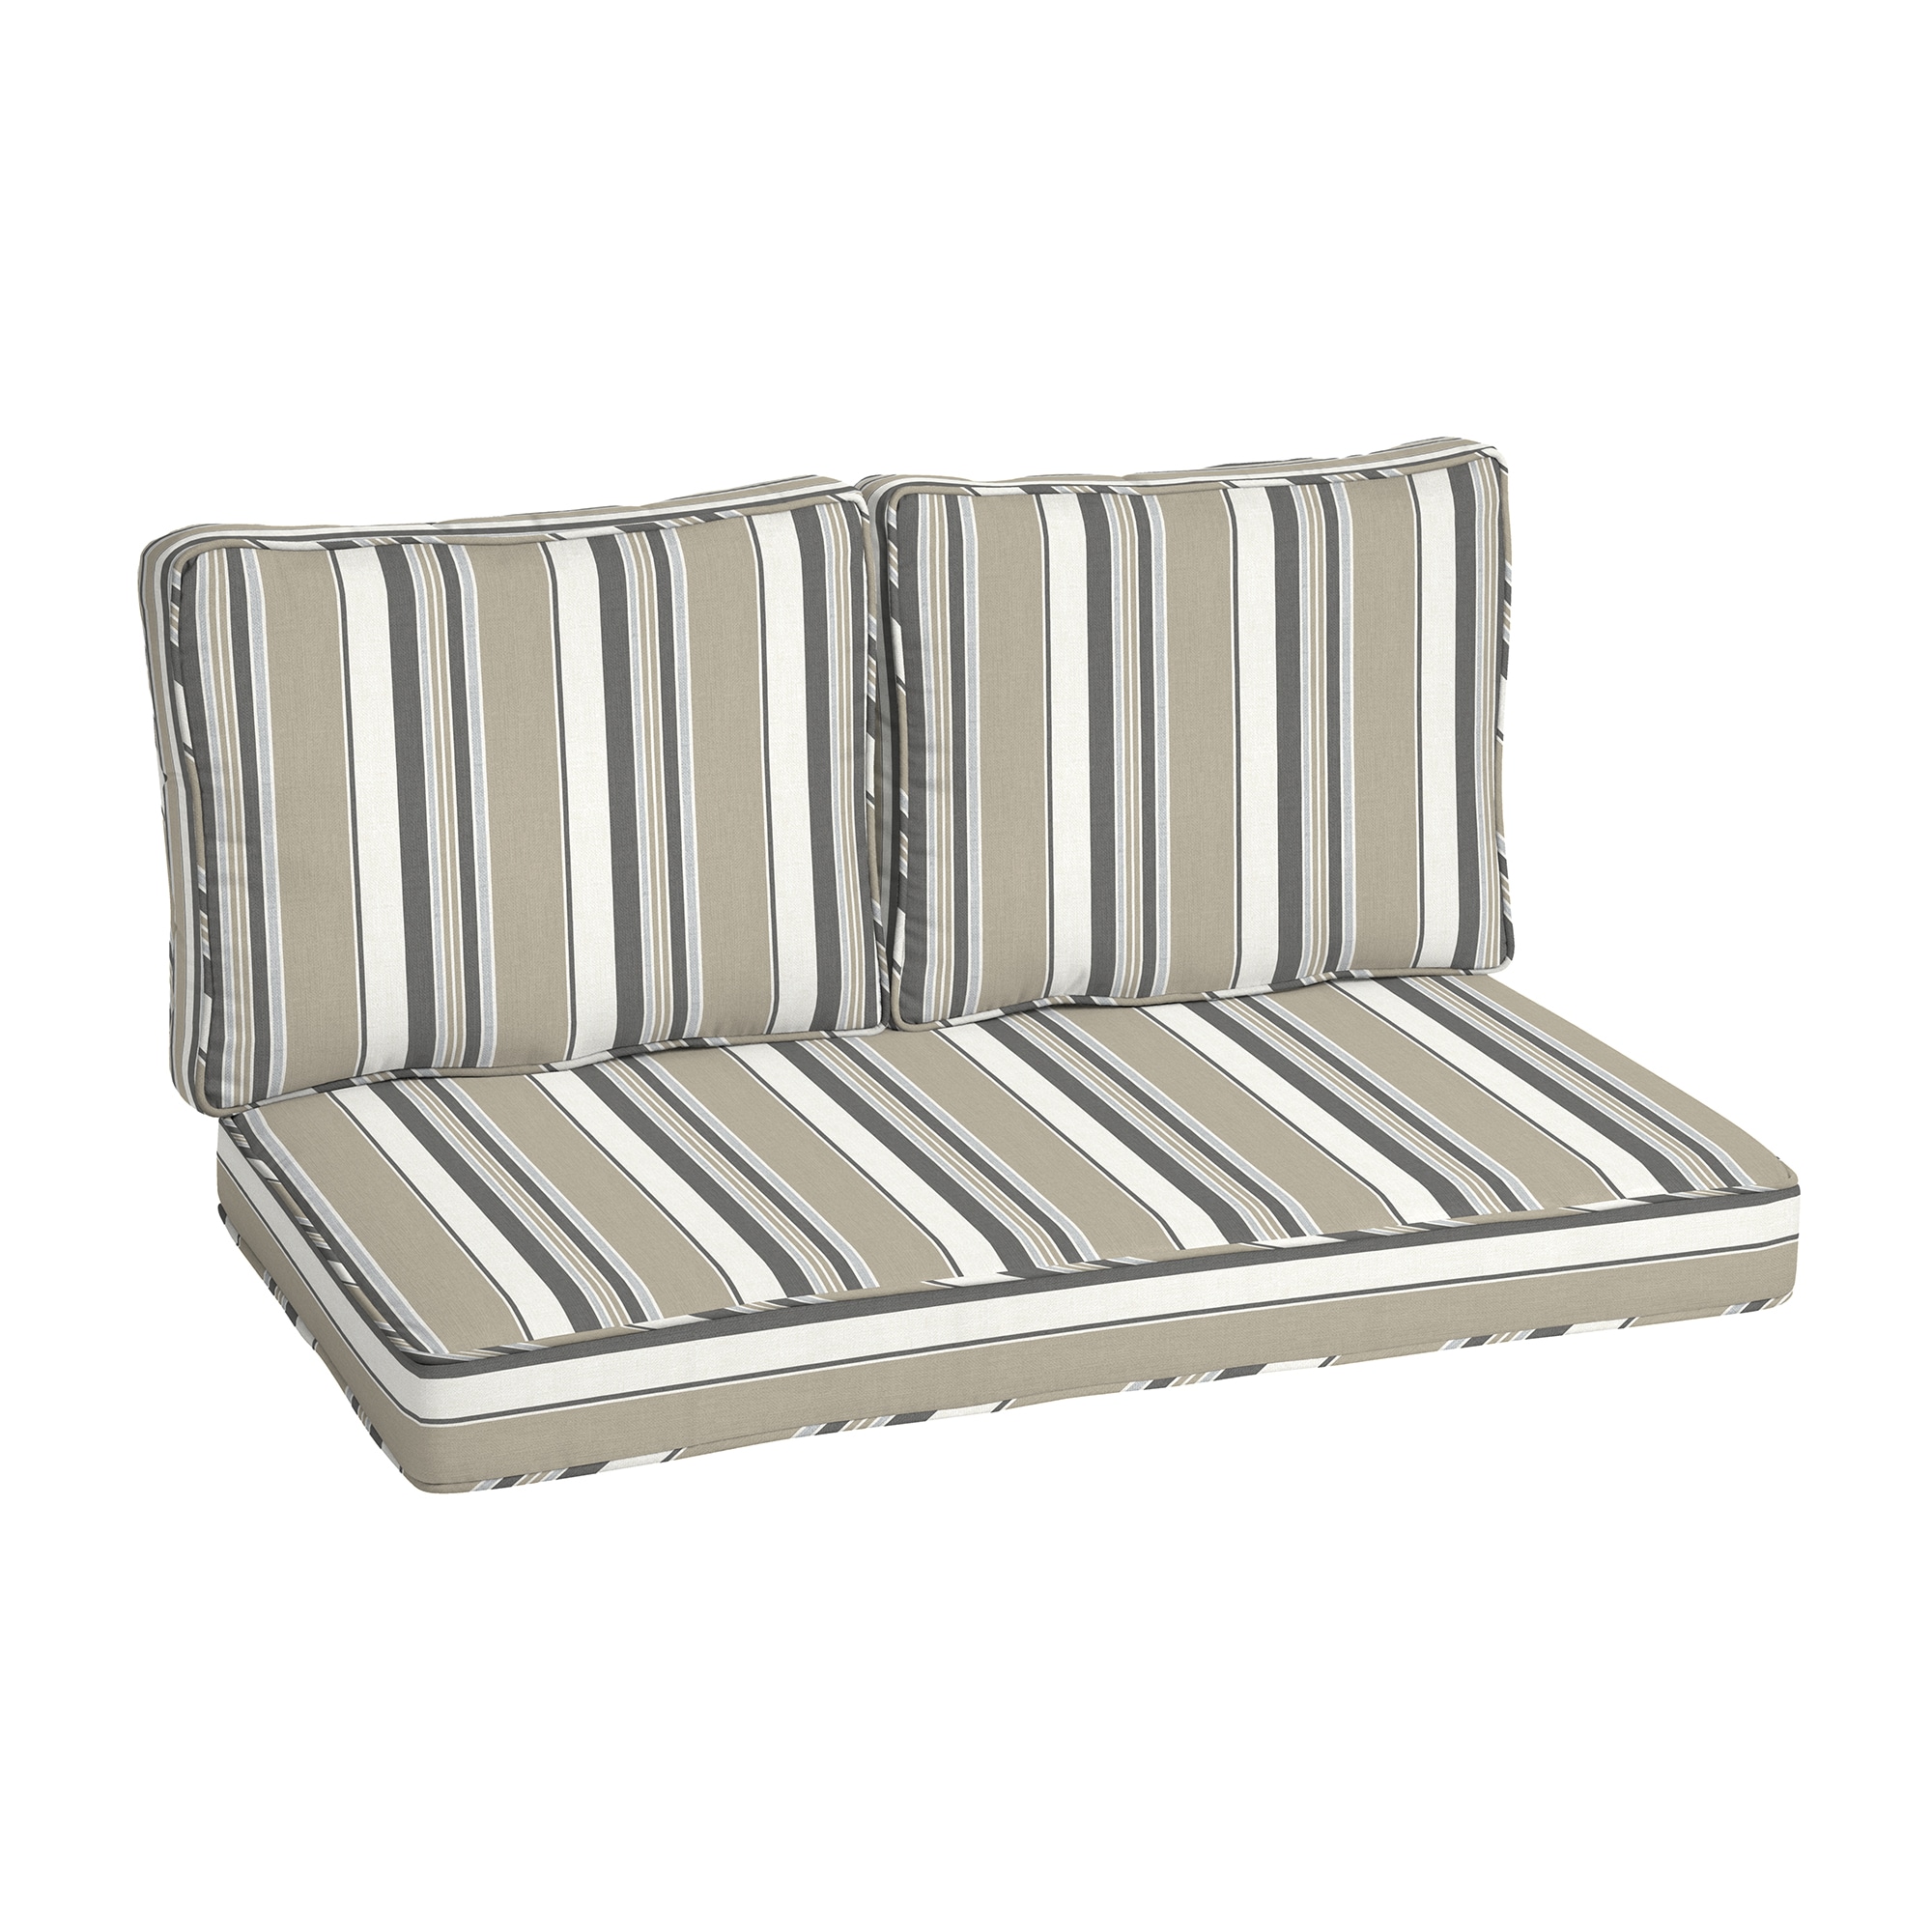 Arden Selections Outdoor Deep Seat Set Leala Texture Taupe